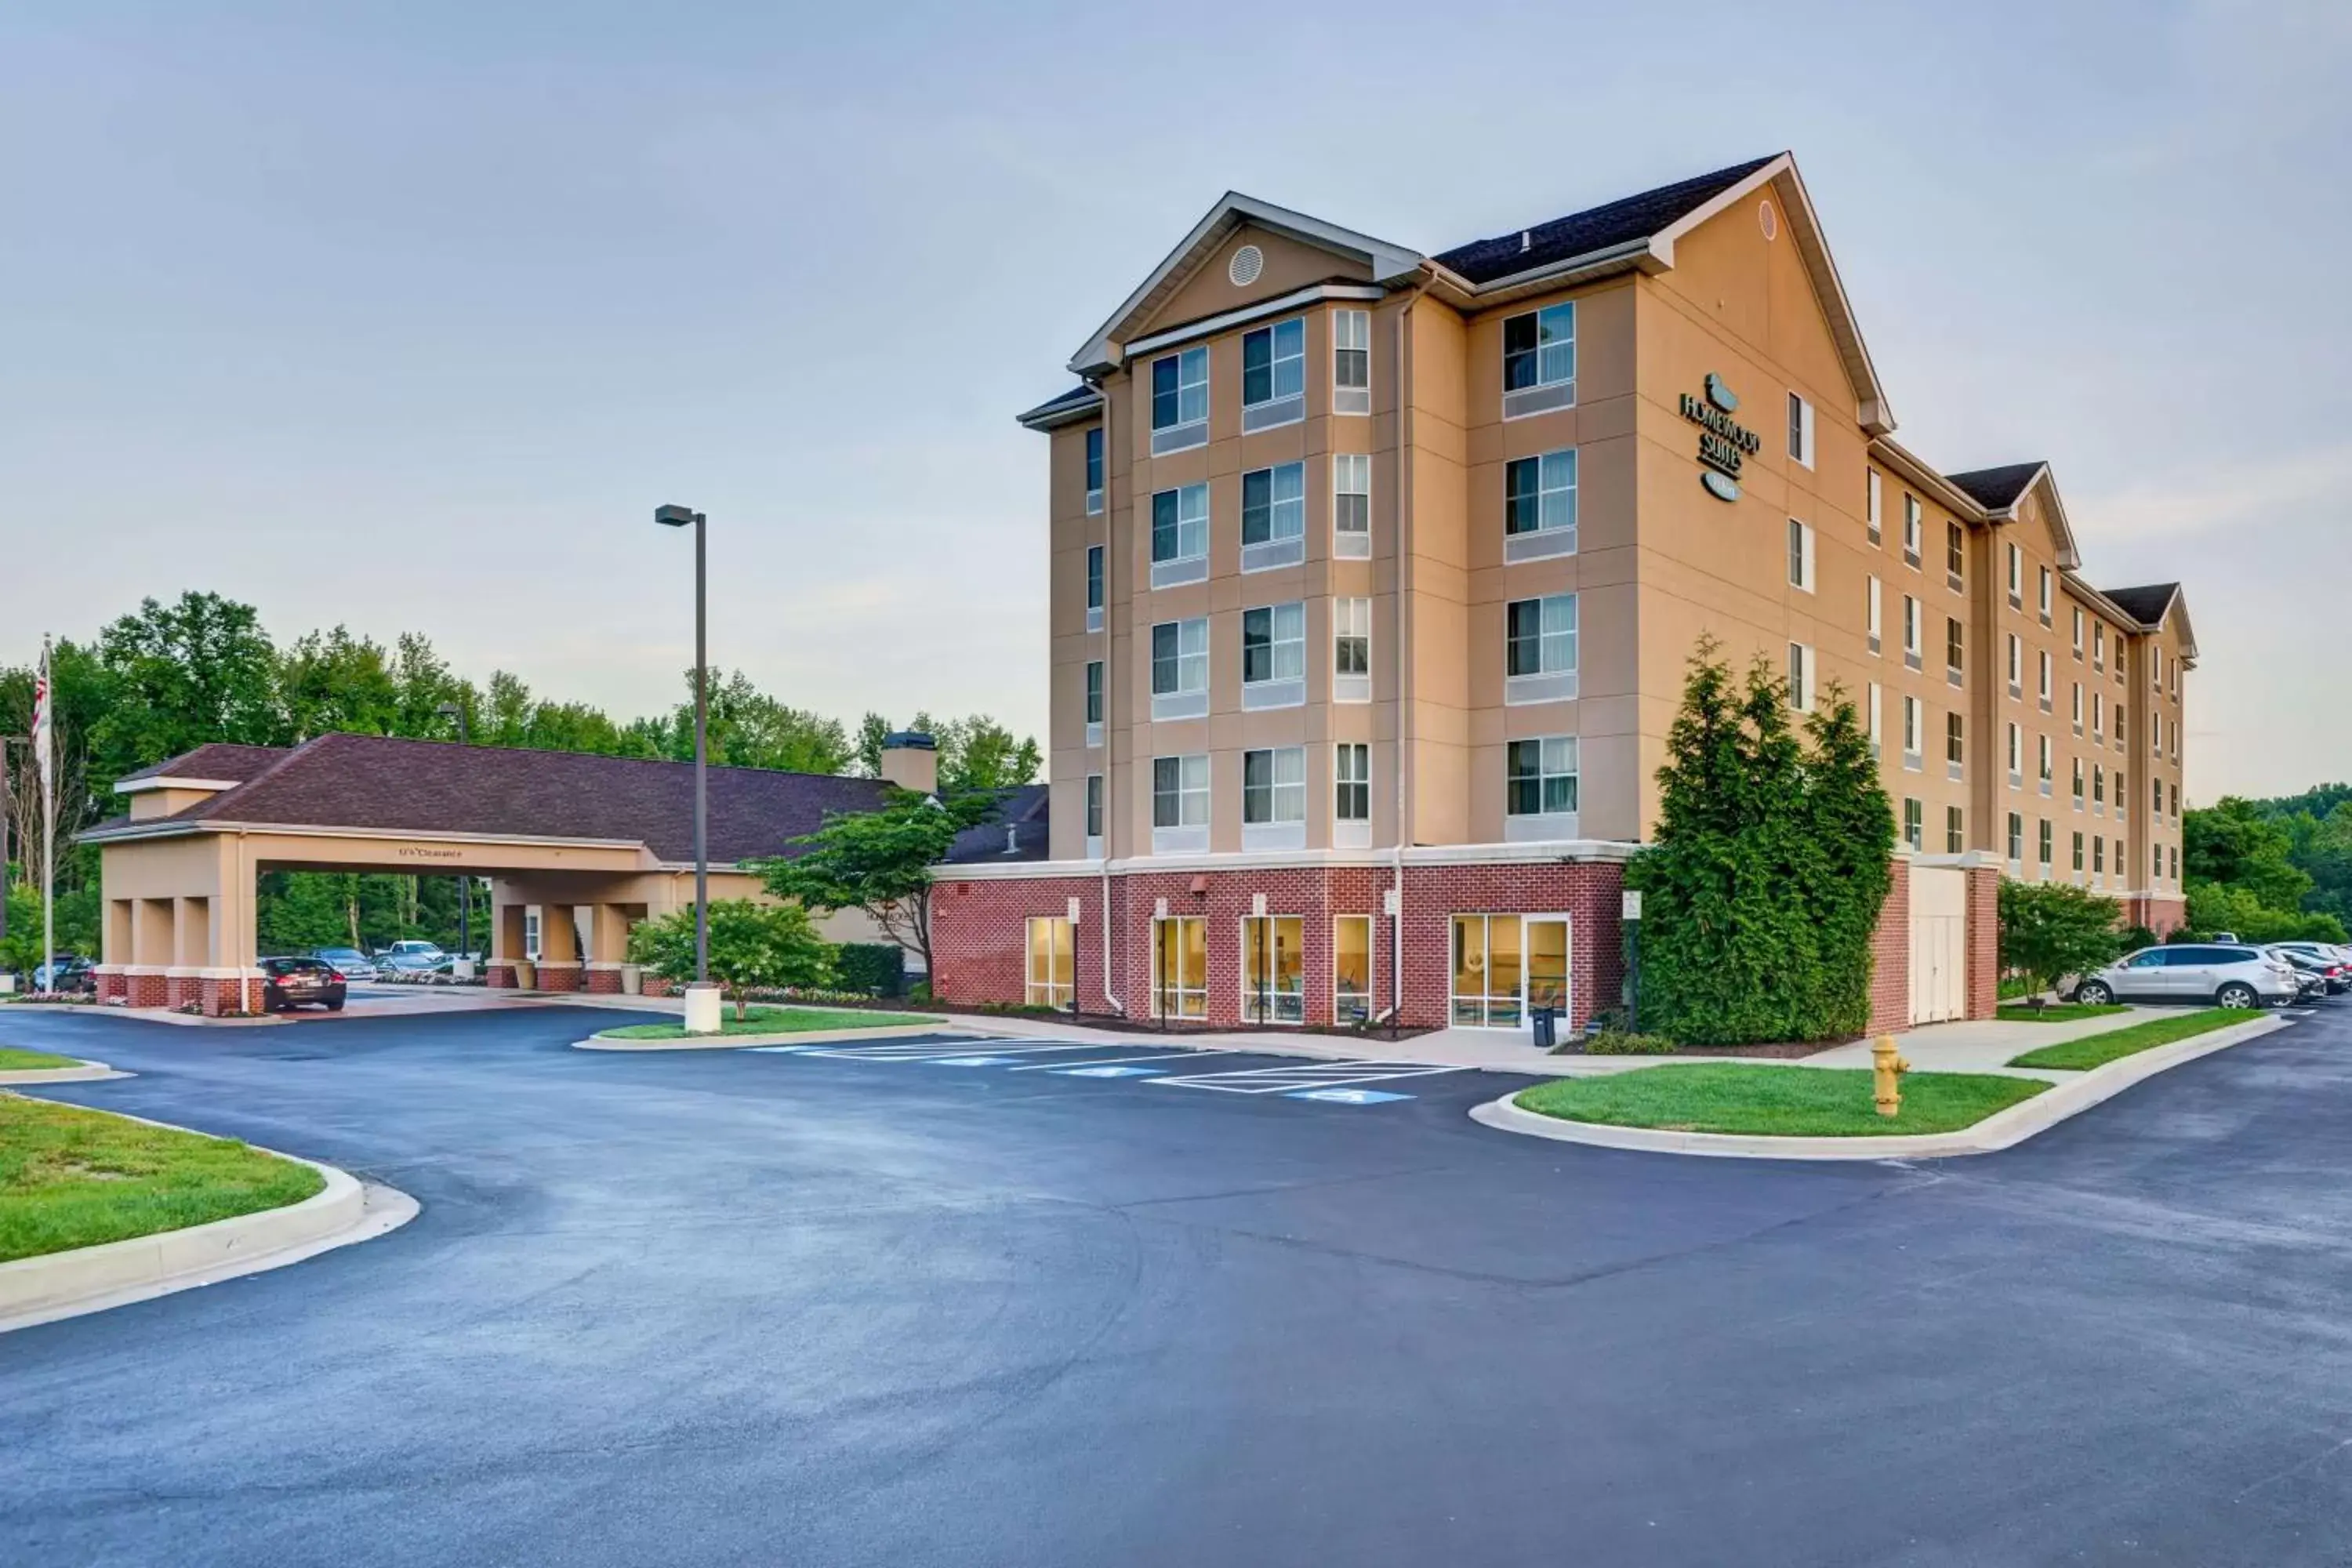 Property Building in Homewood Suites by Hilton Bel Air